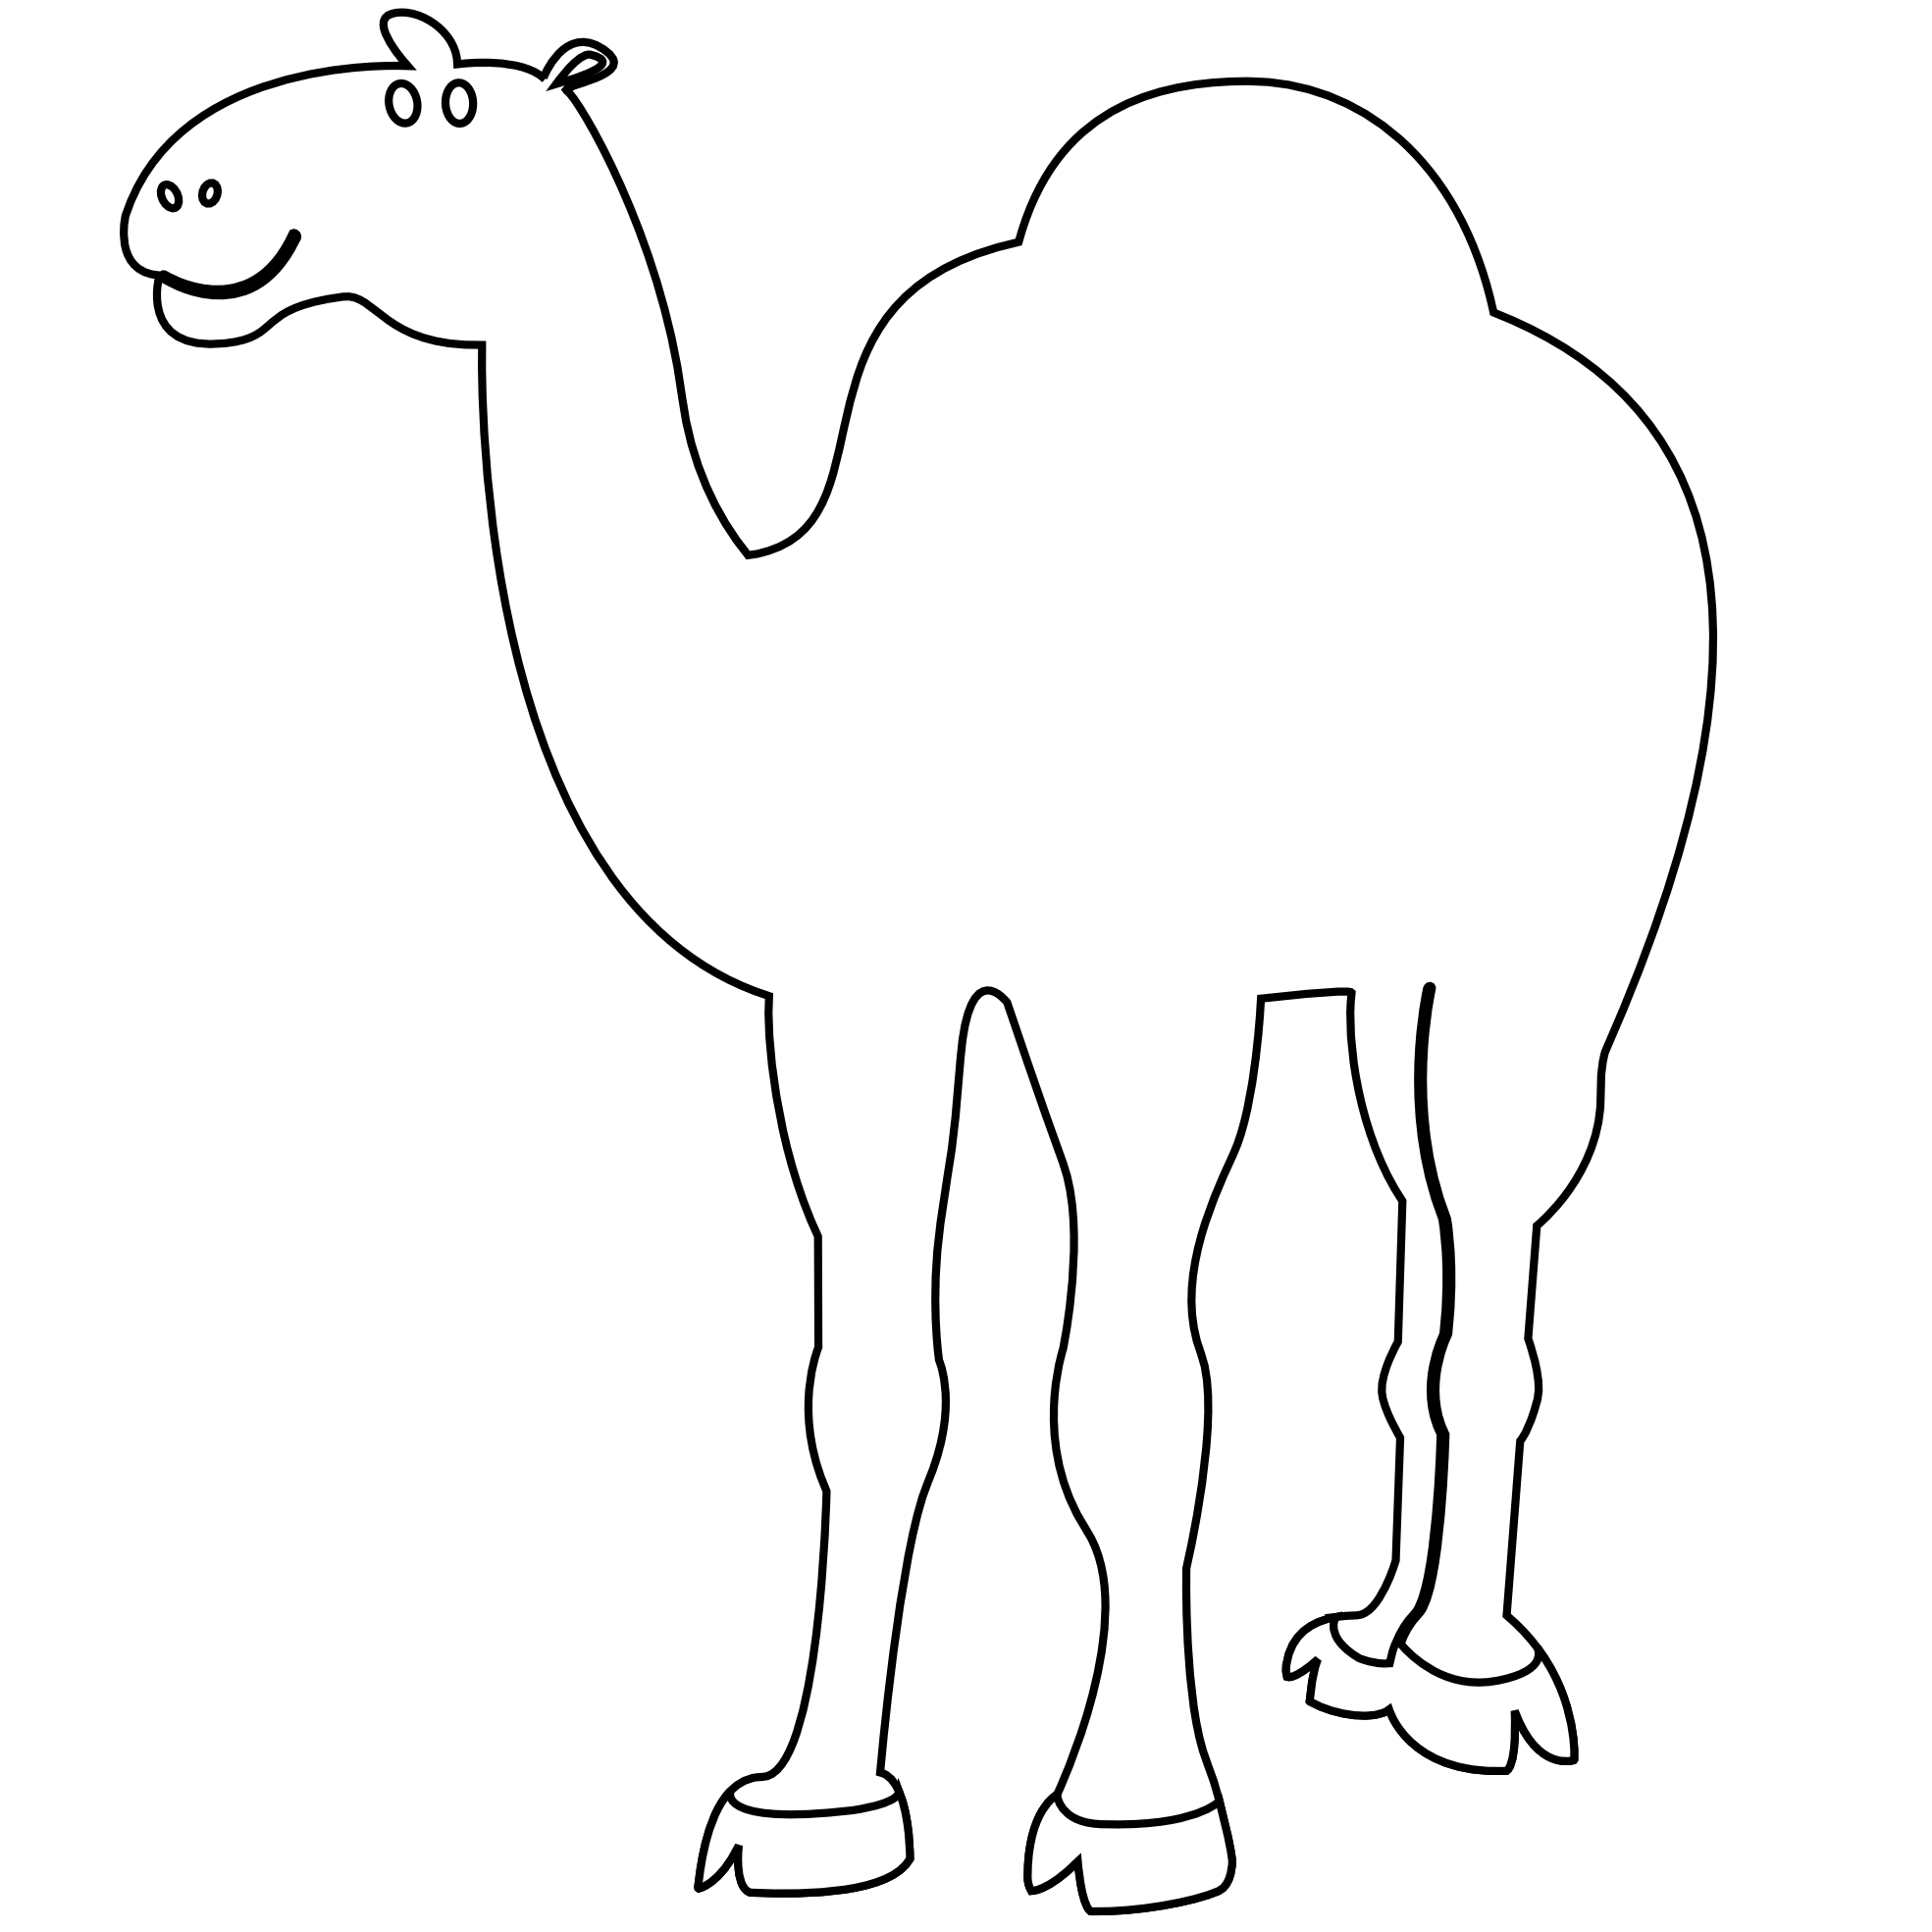 Black and white panda. Camel clipart colorful